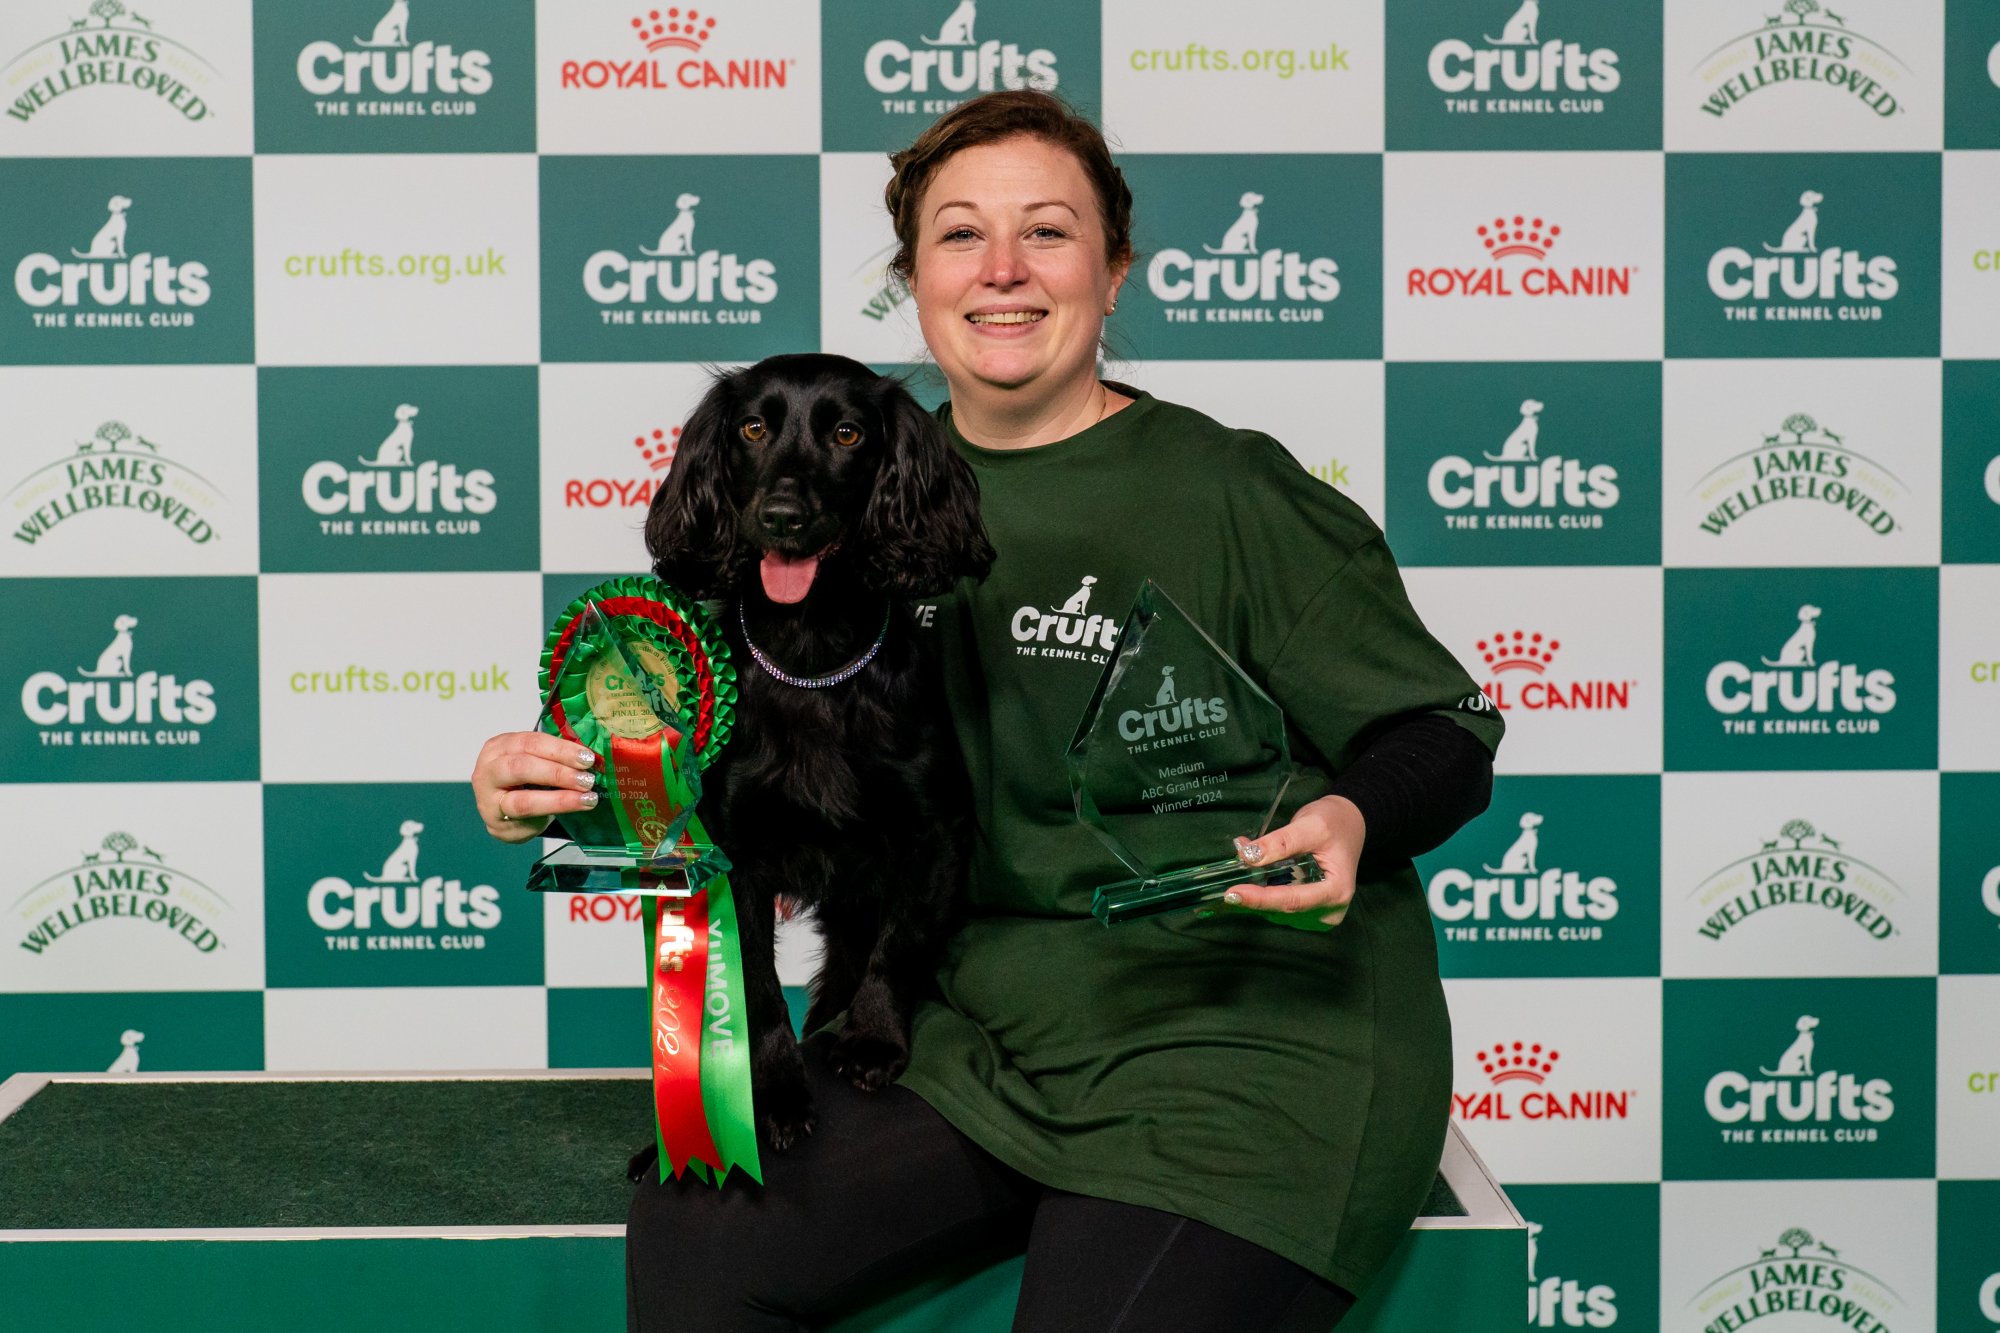 Worcester agility star crowned winner at Crufts. Crufts Medium Novice ABC agility winner Georgie and Eadie Credit BeatMedia | The Kennel Club